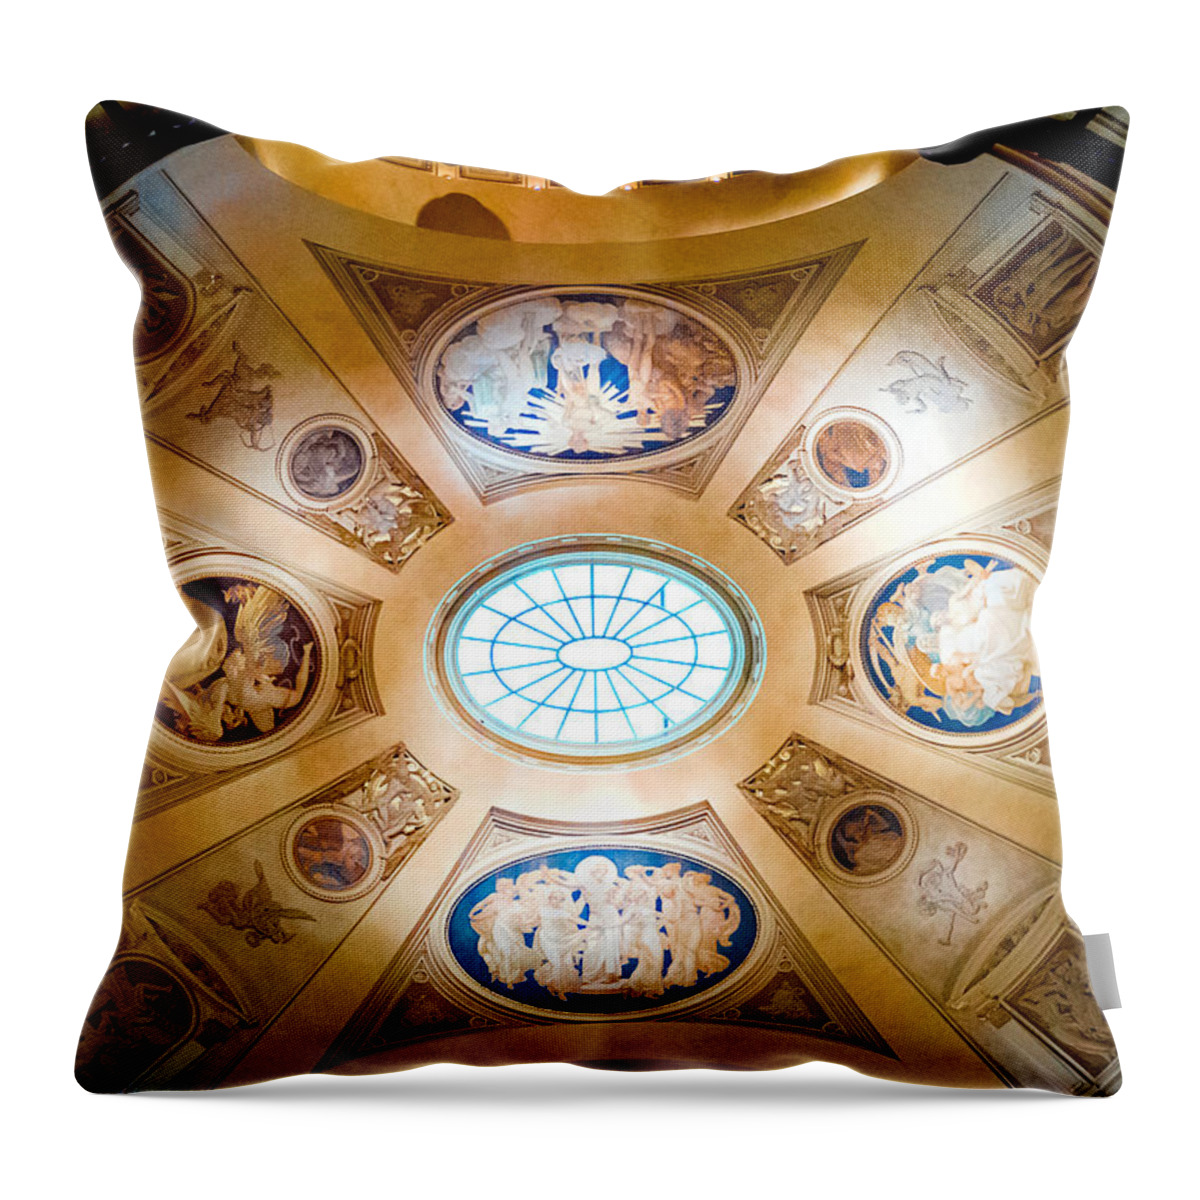 Asian Throw Pillow featuring the photograph Ceiling Art by Greg Fortier